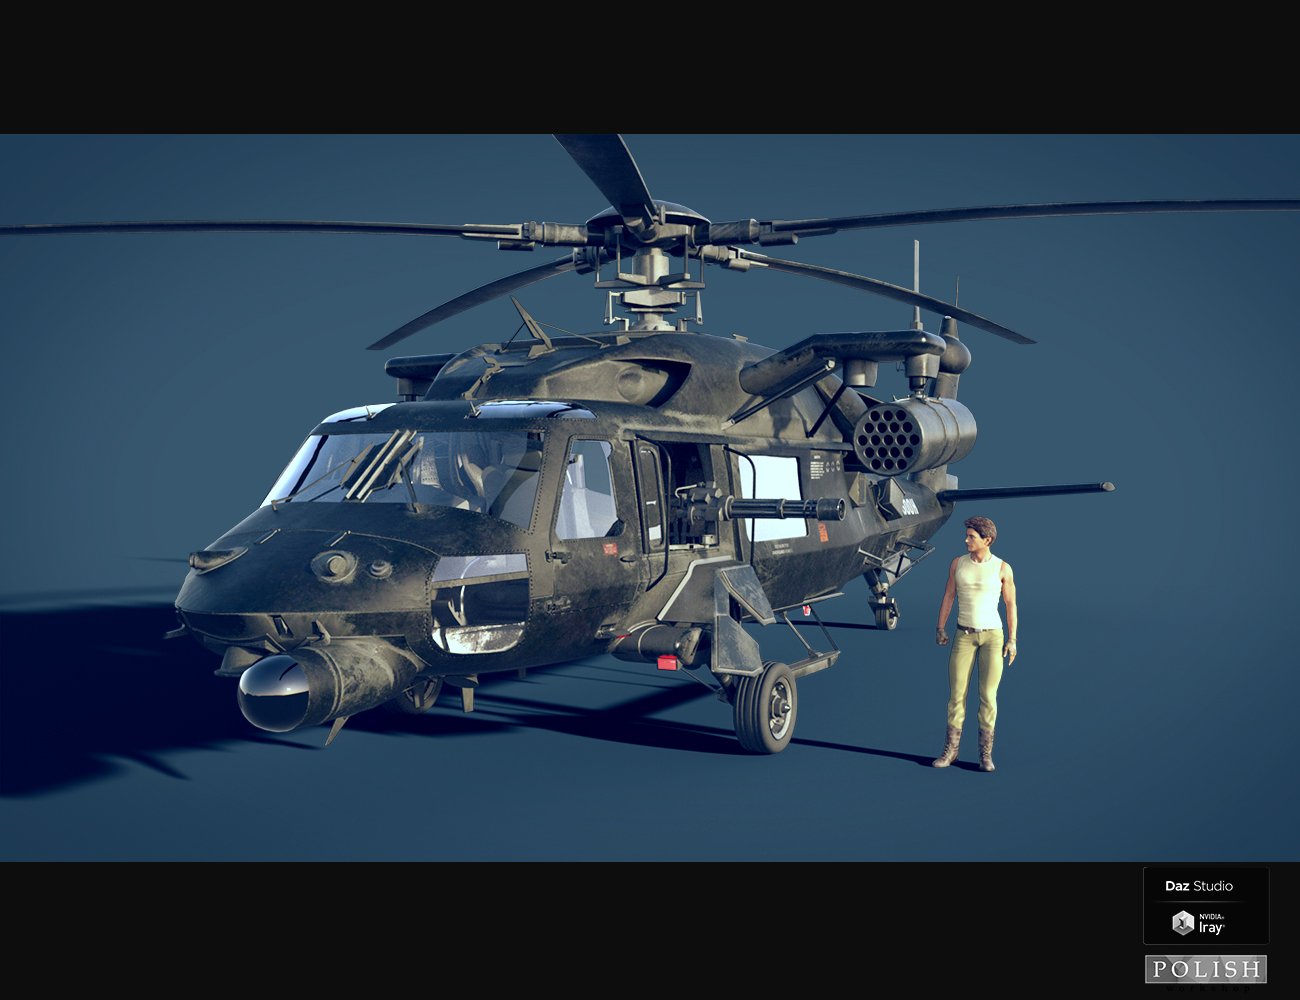 BH Support Helicopter by: Polish, 3D Models by Daz 3D